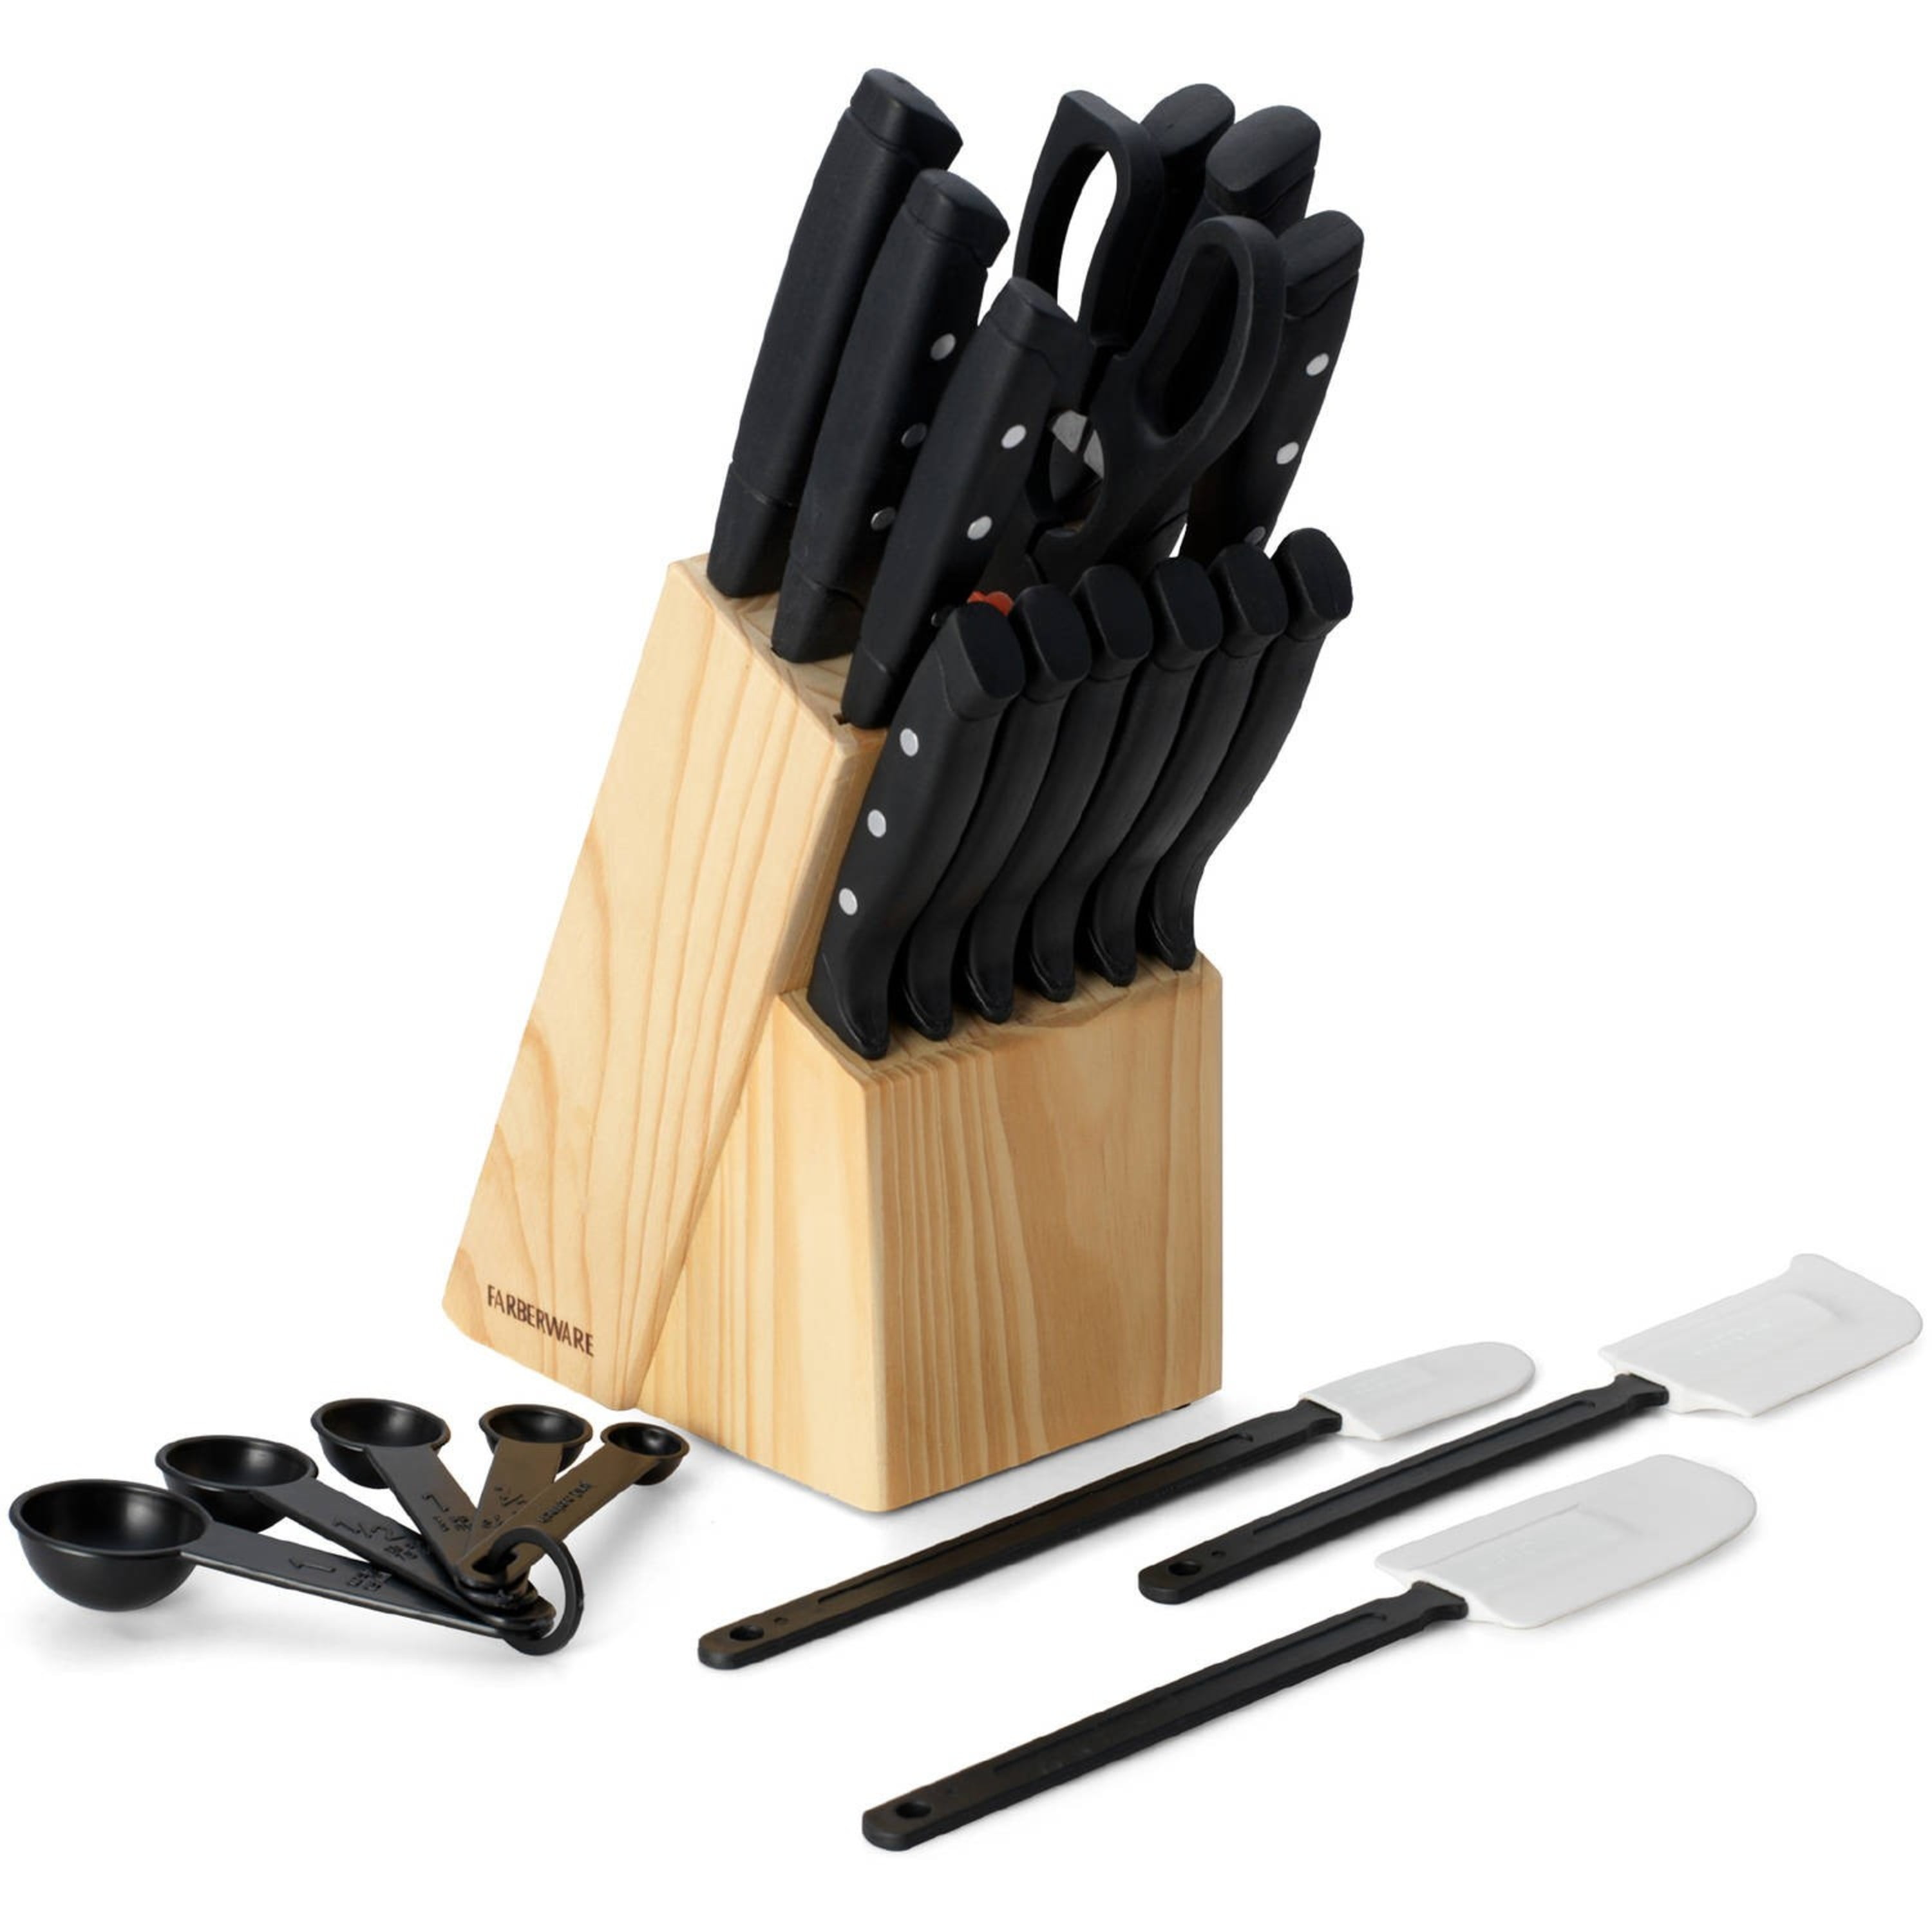  Farberware 22-Piece Never Needs Sharpening Triple Rivet  High-Carbon Stainless Steel Knife Block and Kitchen Tool Set, Black :  Everything Else